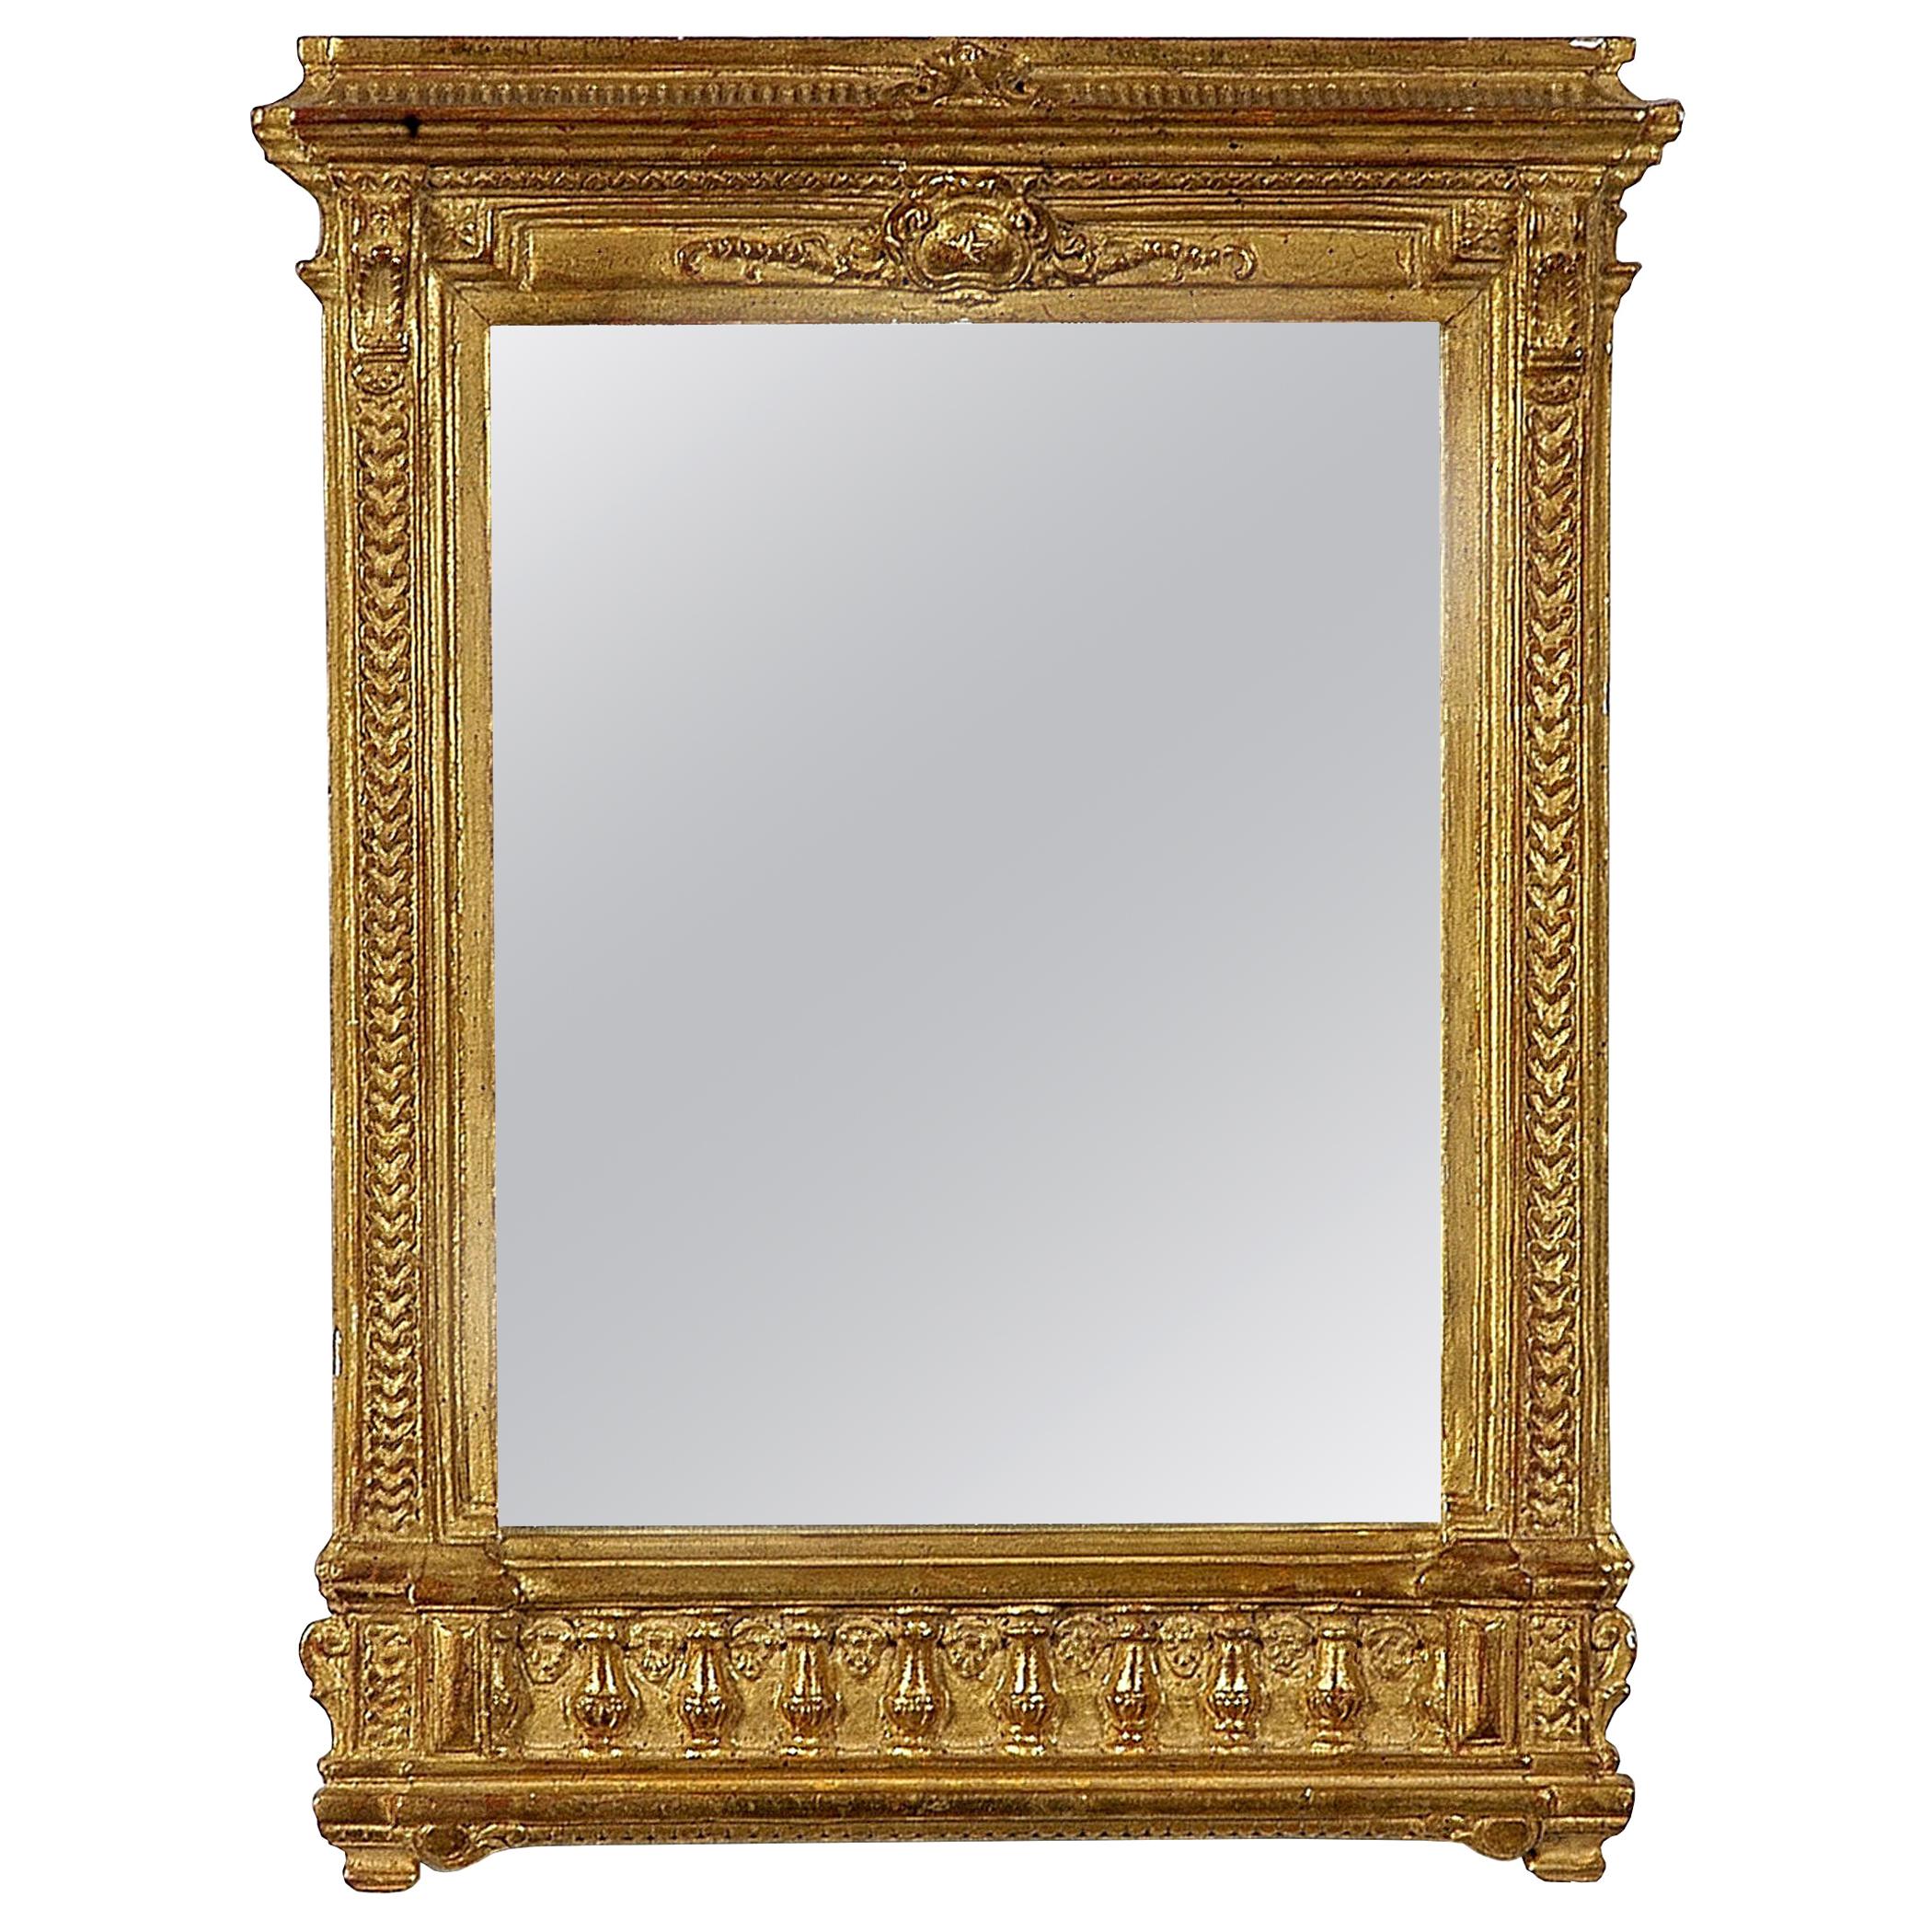 Neoclassical Empire Rectangular Gold Hand Carved Wooden Mirror